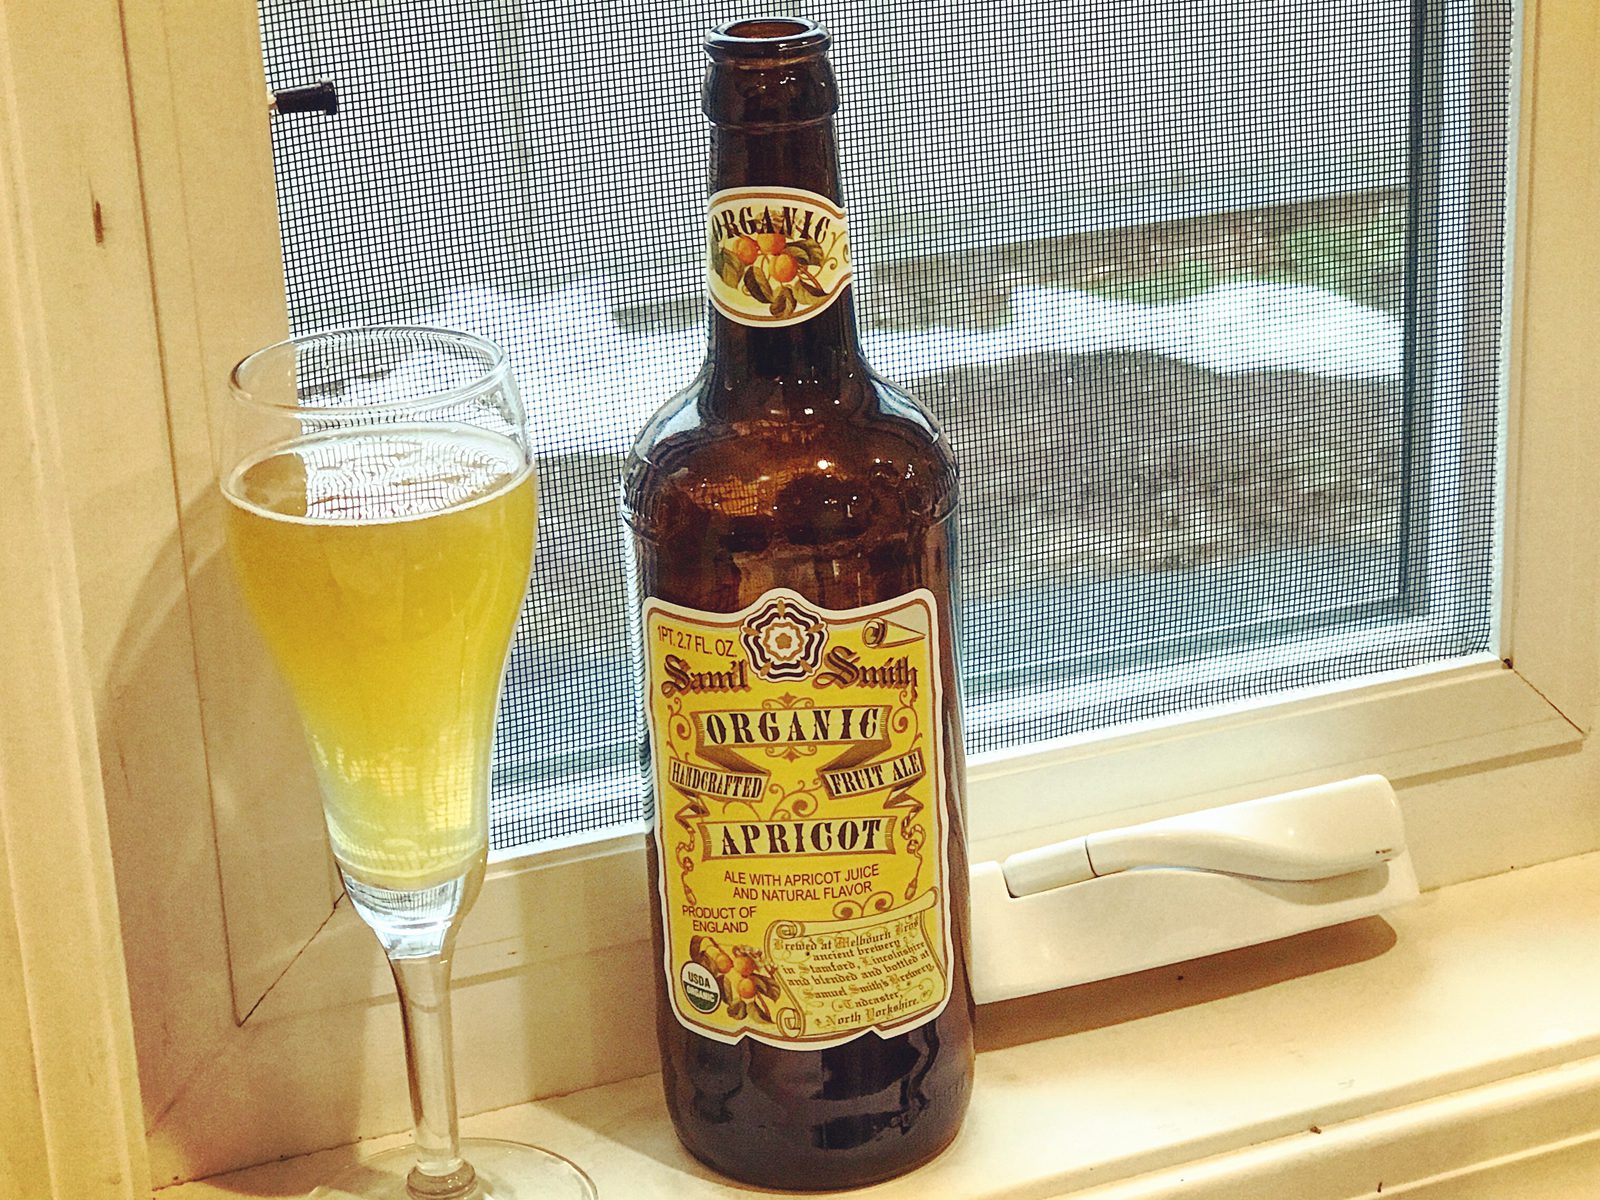 Samuel Smith's Old Brewery: Organic Apricot Ale